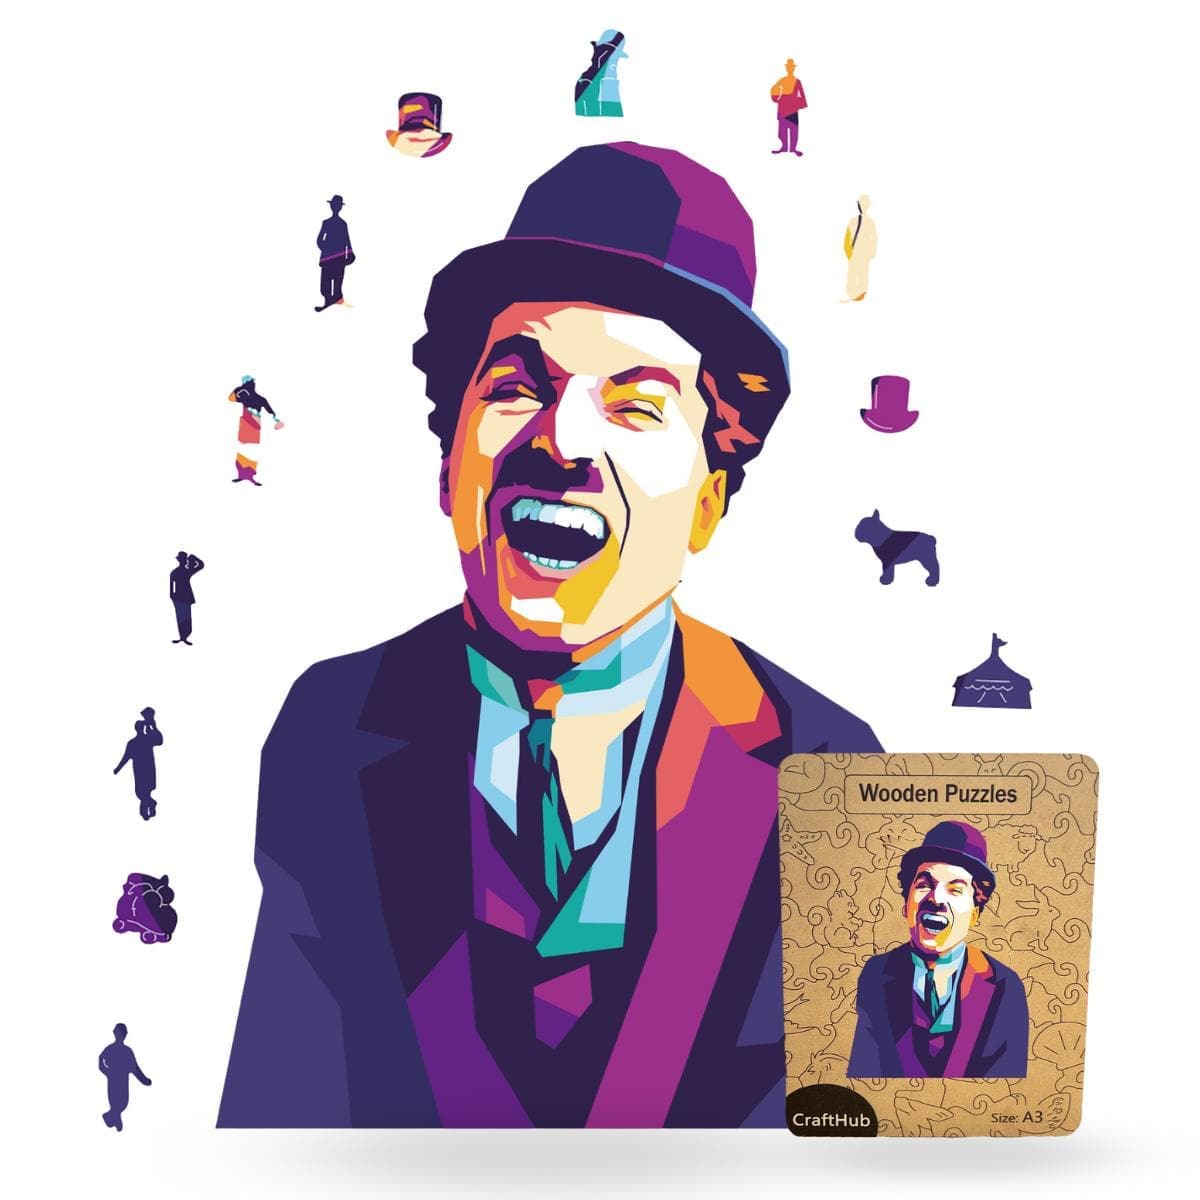 Animal Jigsaw Puzzle > Wooden Jigsaw Puzzle > Jigsaw Puzzle Laughing Charlie Chaplin - Jigsaw Puzzle